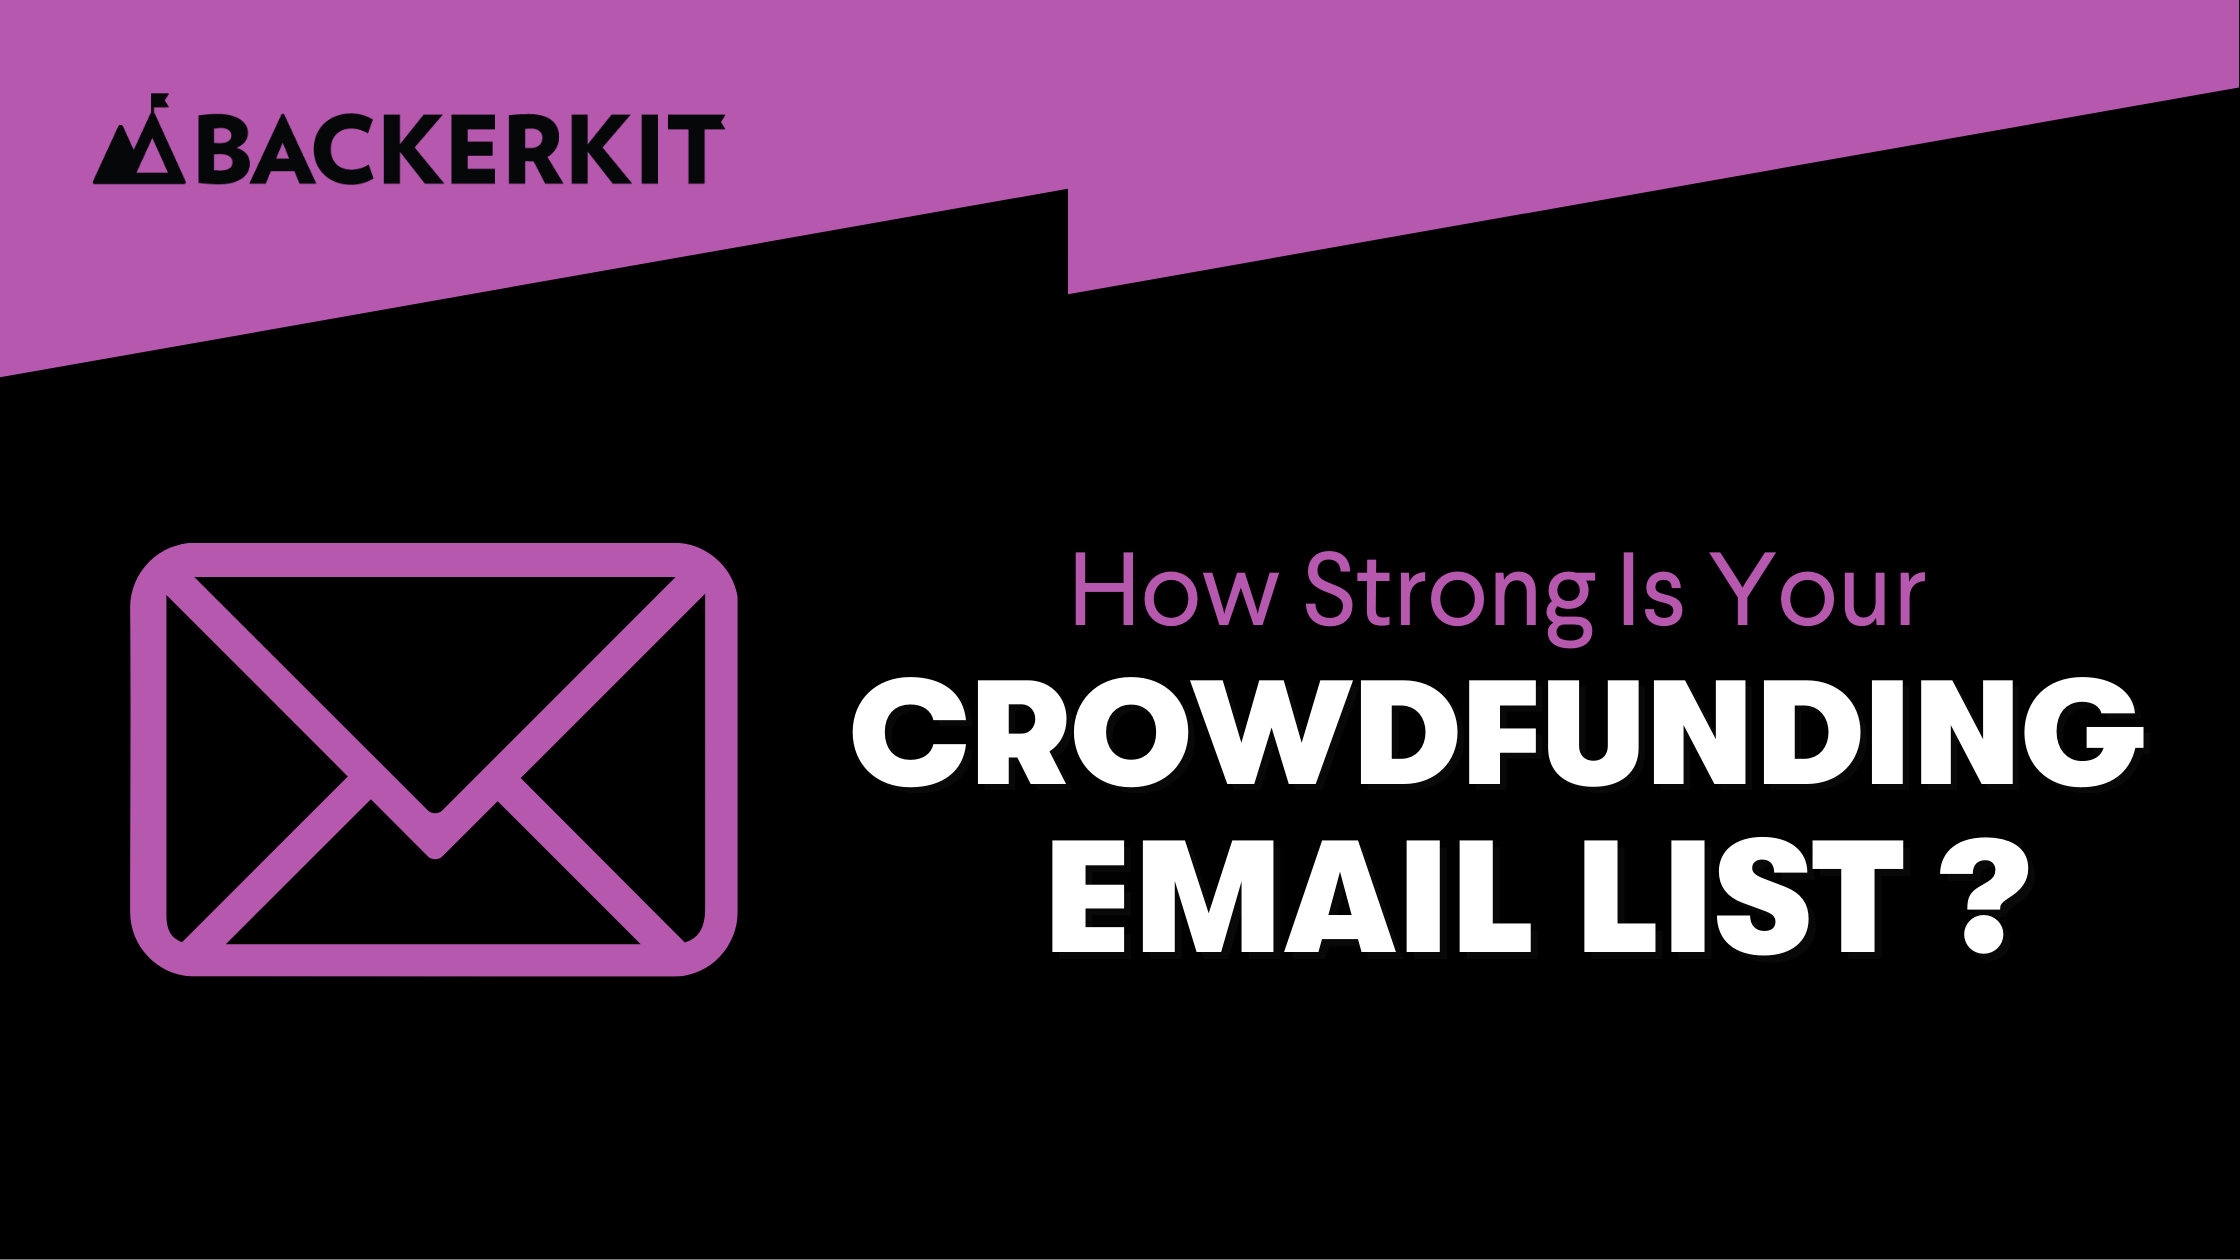 crowdfunding email list